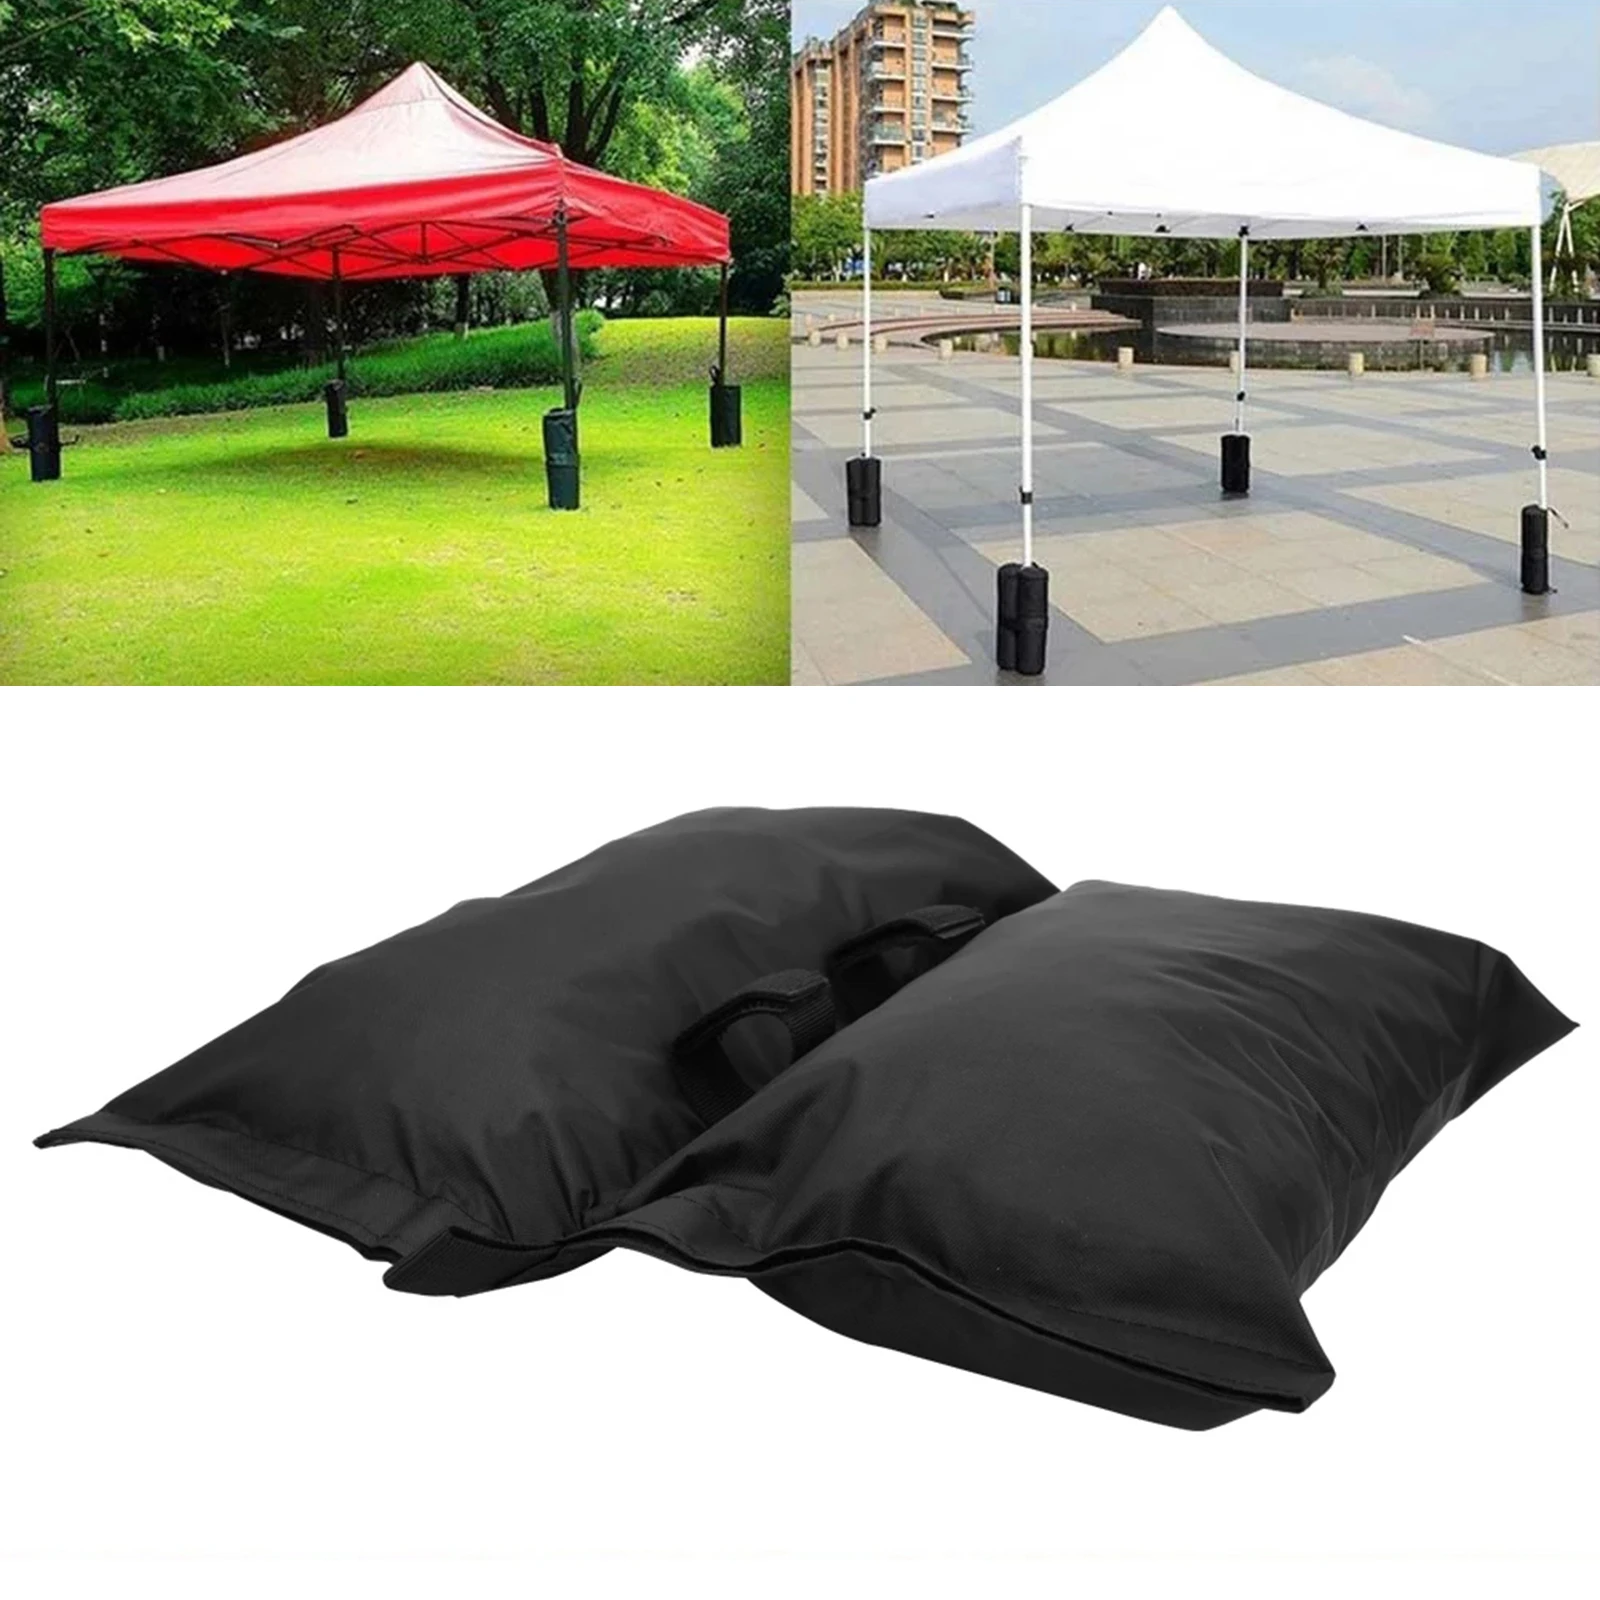 Portable Parasol Umbrella Fixing Sand Bags, Outdoor Base Weight Bags, Fixing Sandbags for  up Canopy Instant Shelter